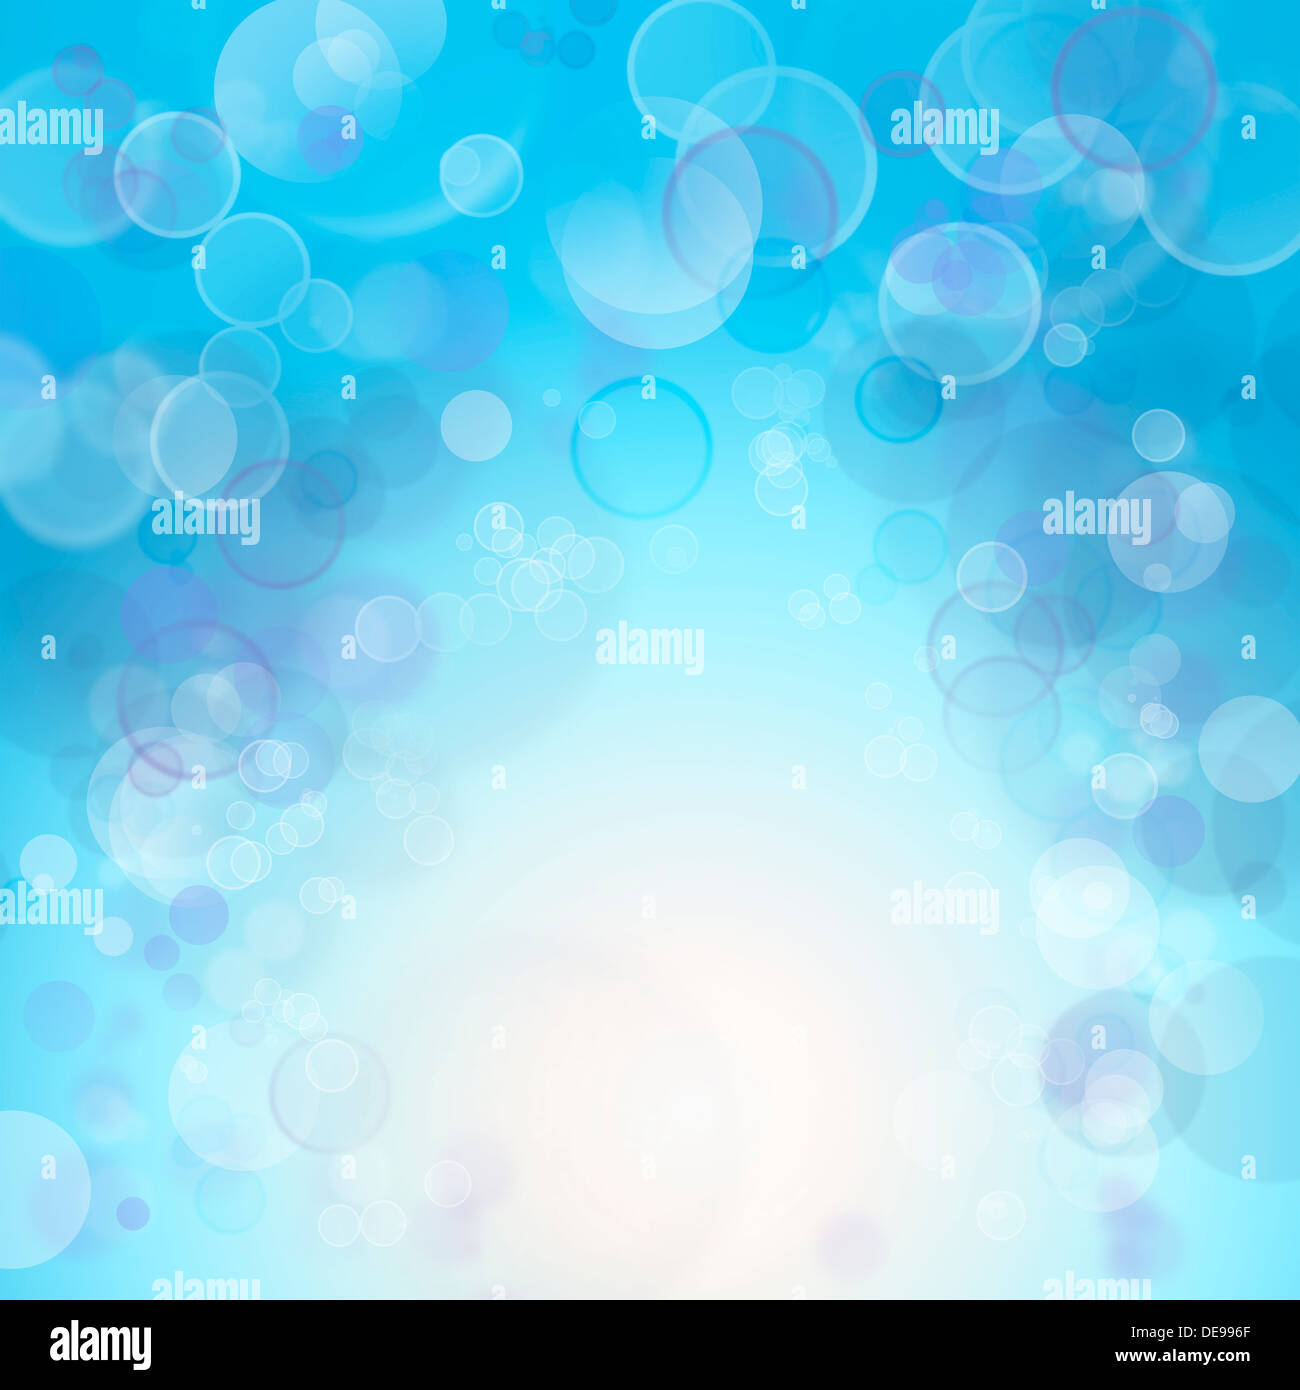 Circles on blue color background Stock Photo